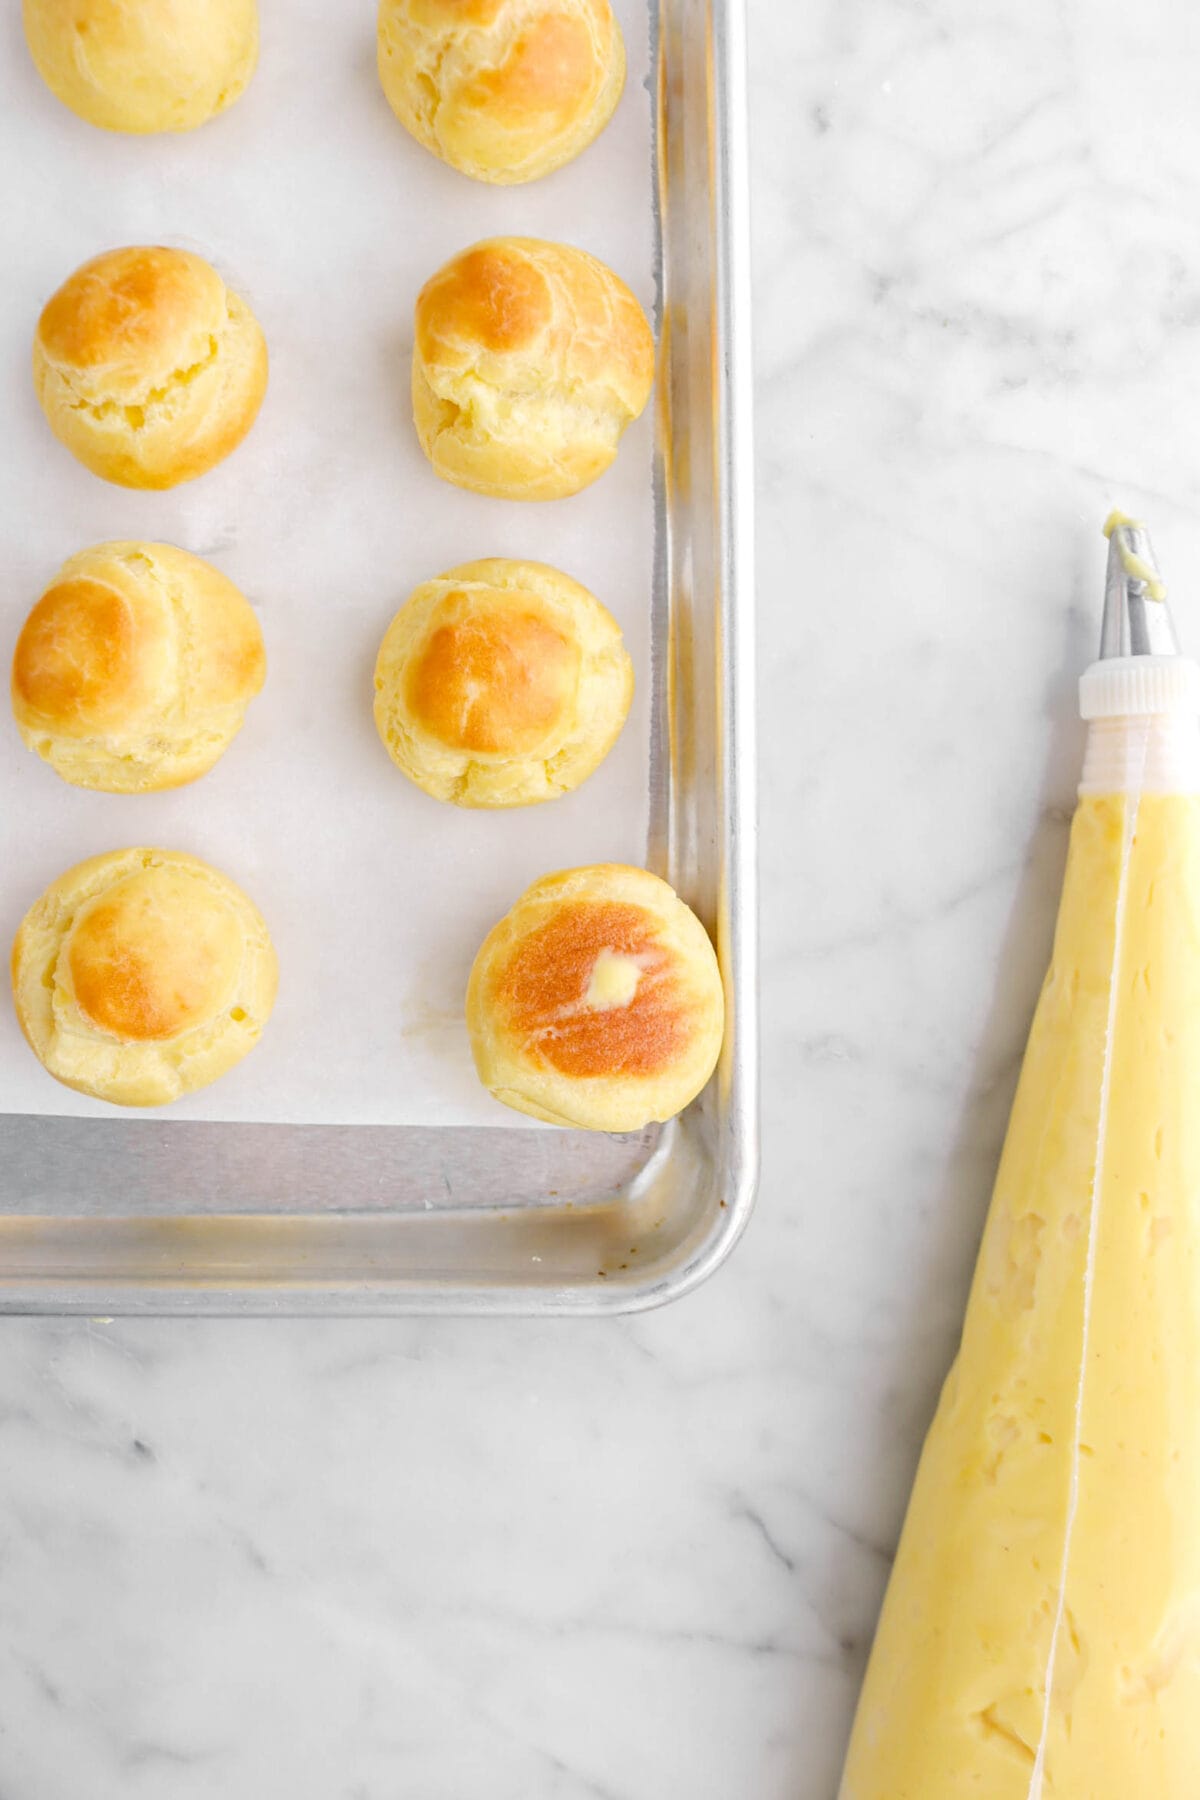 choux bun filled with pastry cream with piping bag of pastry cream beside.